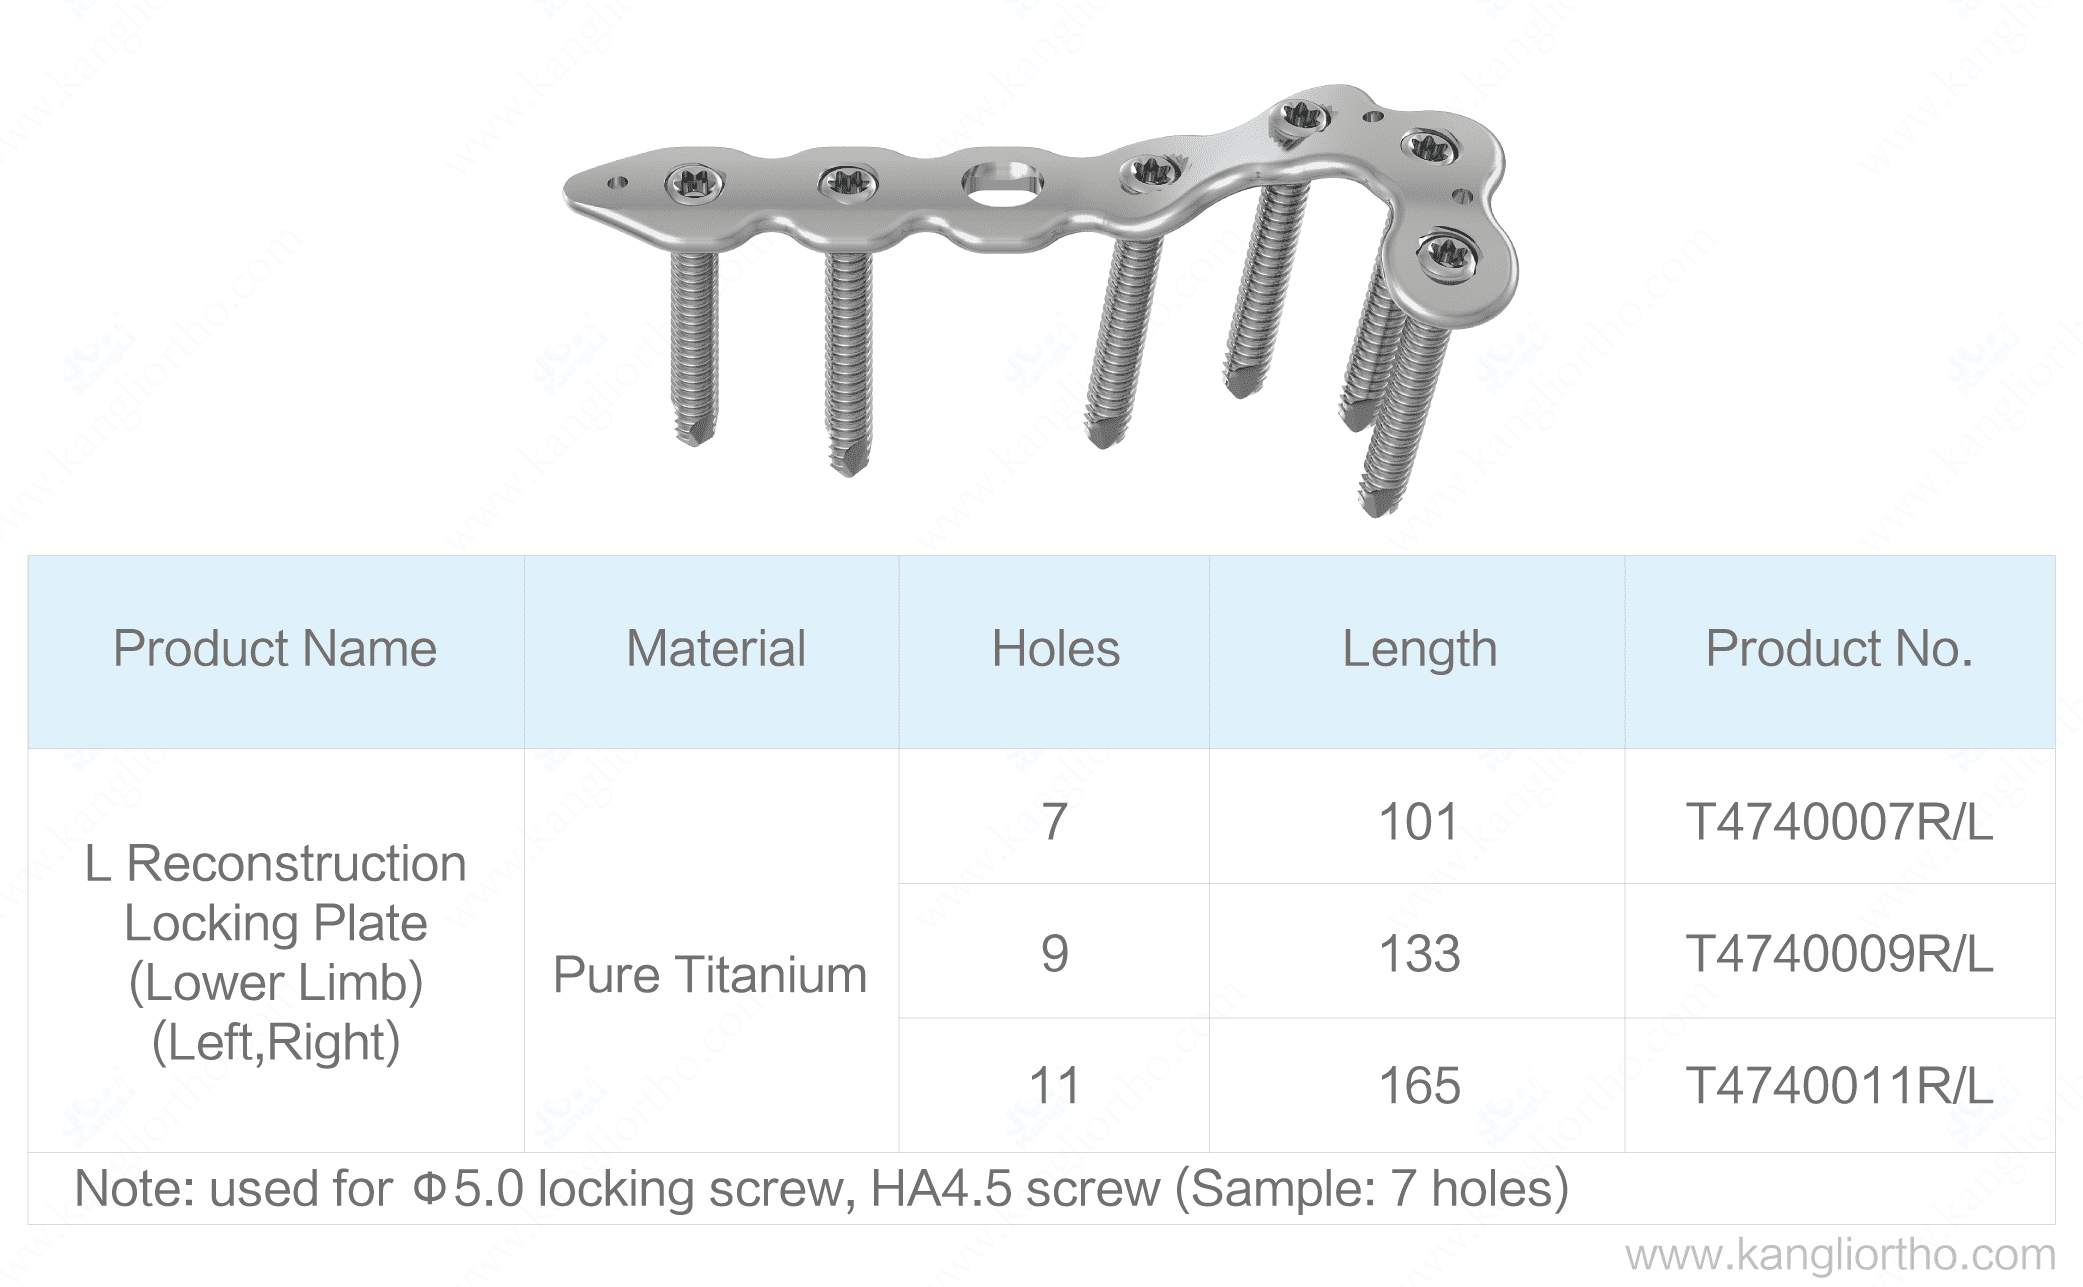 l-reconstruction-locking-plate-low-limb-specifications